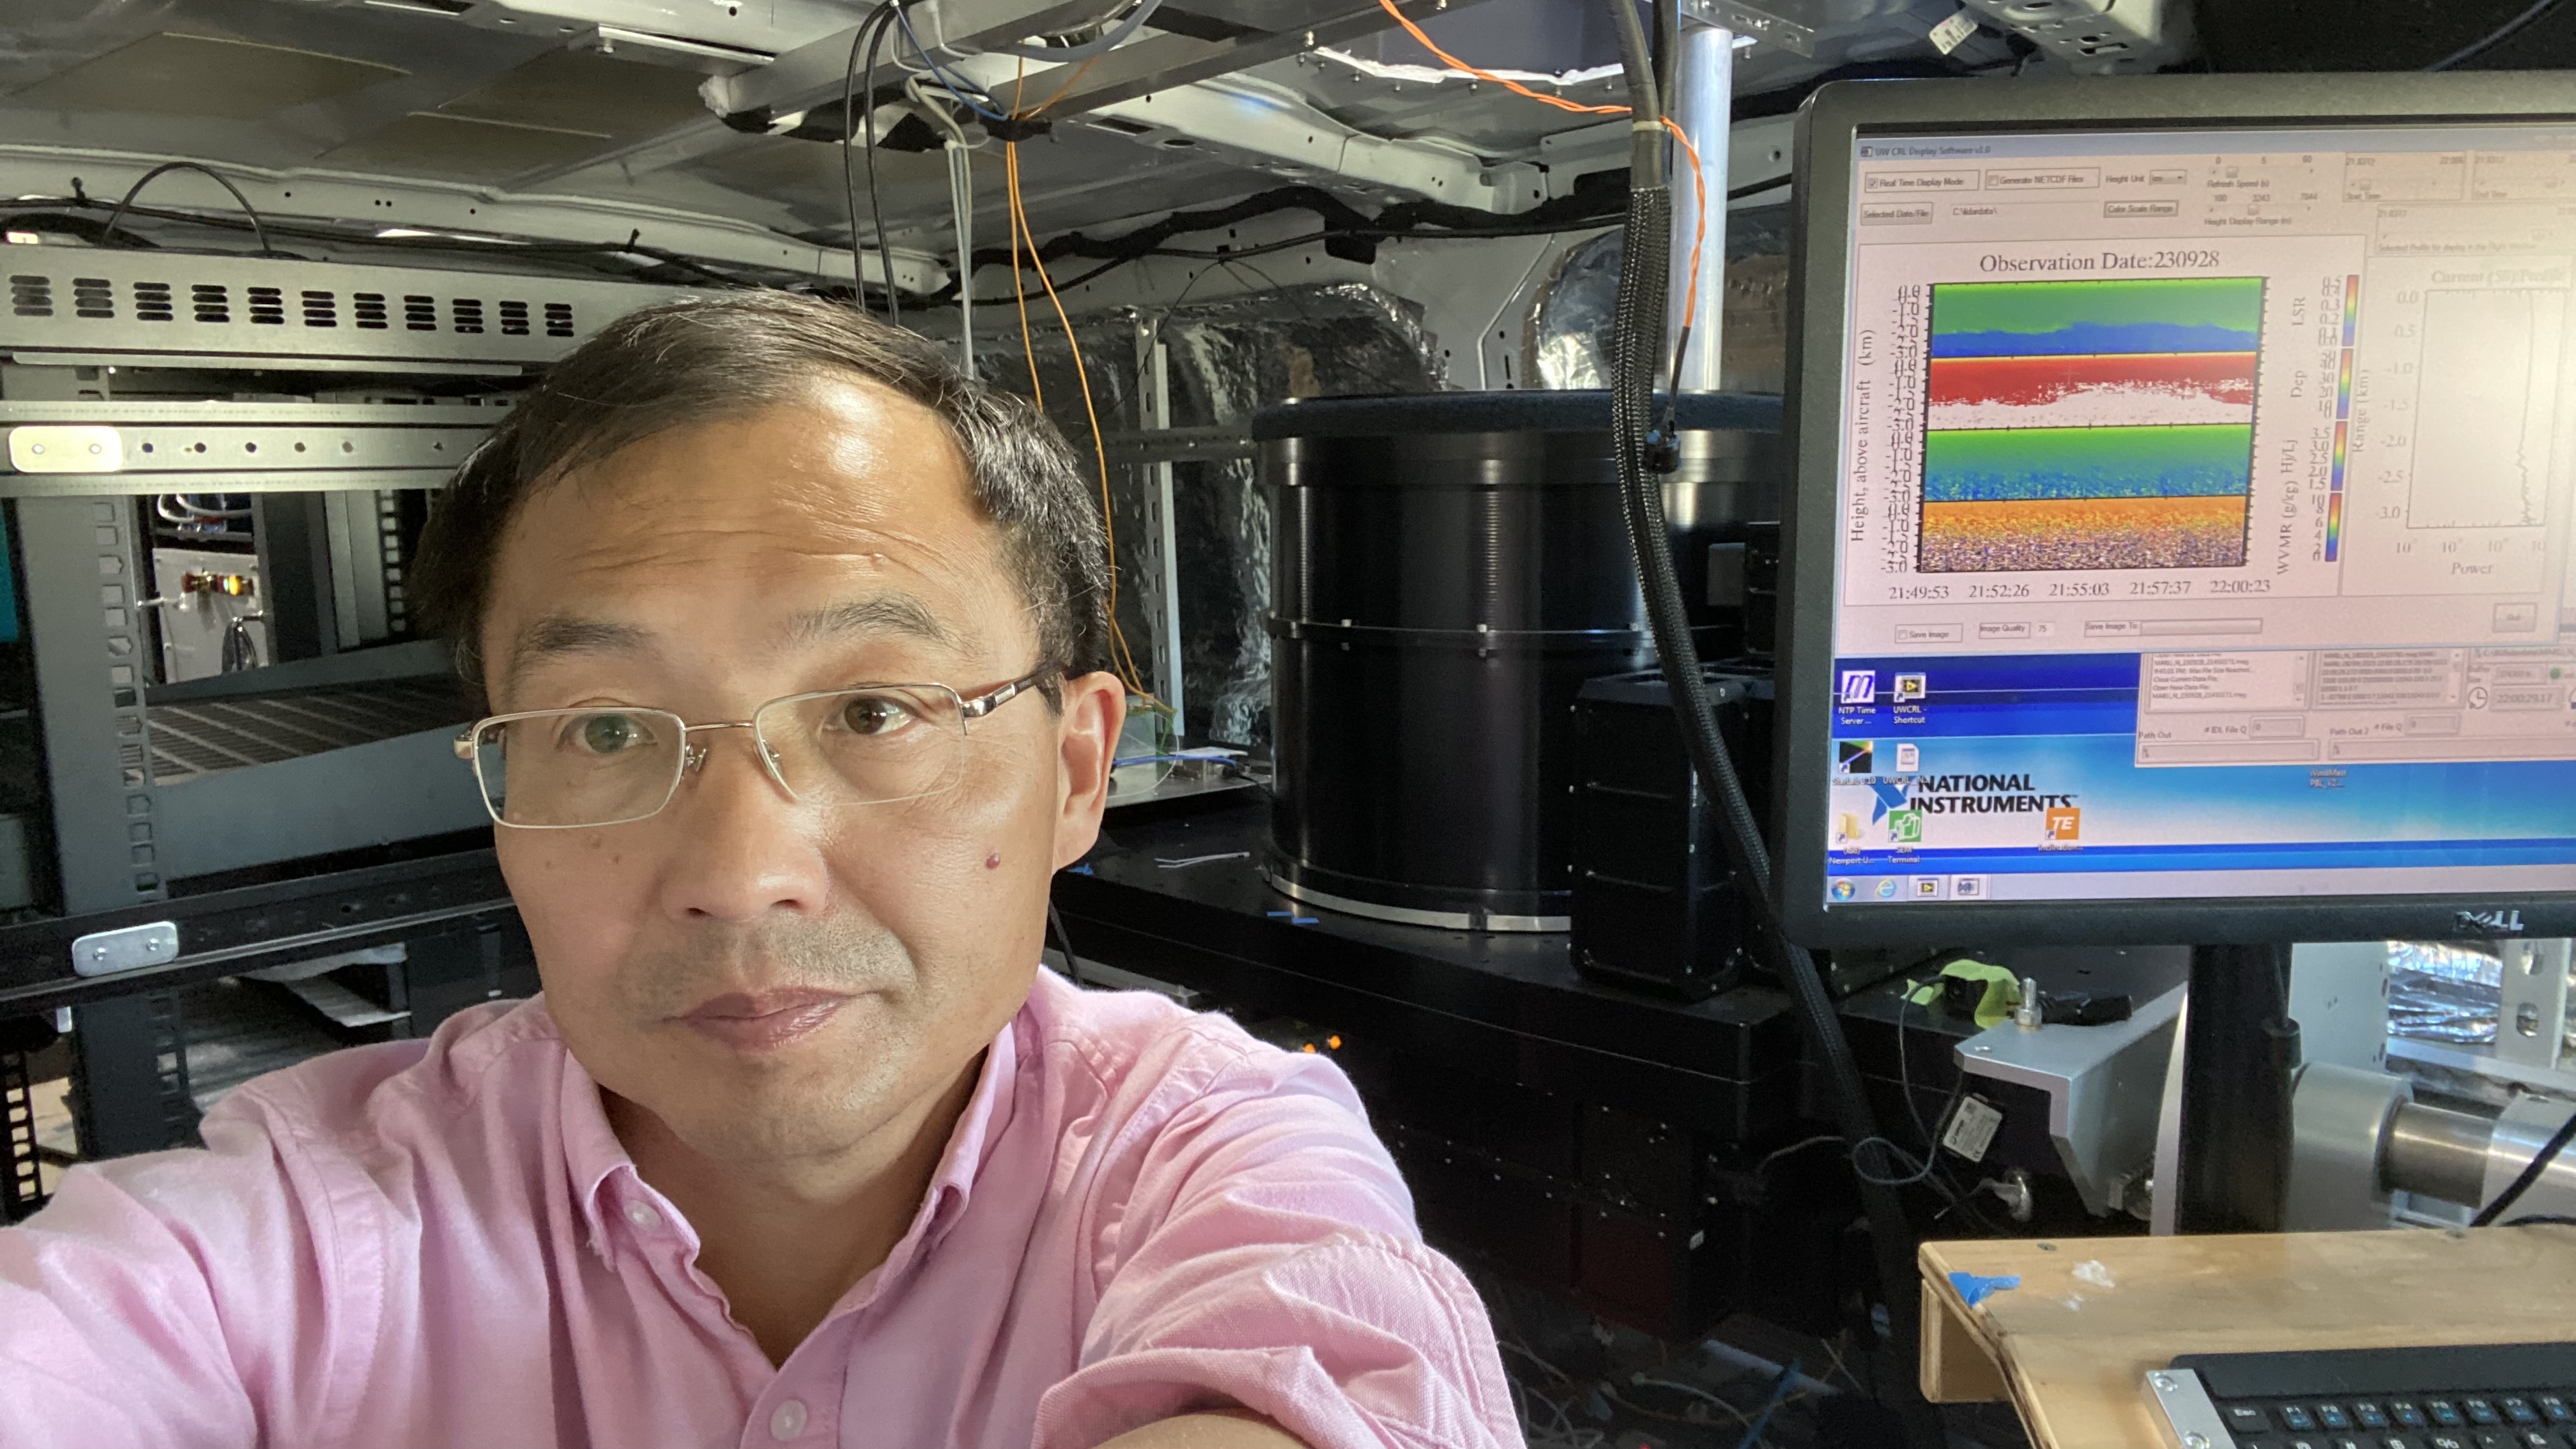 During his career, Wang has built and employed remote sensing instruments in the field. “Creating and using new cutting-edge instruments allows you to see a new dimension of the natural world, which is critical to advance science, especially for atmospheric science,” he says.